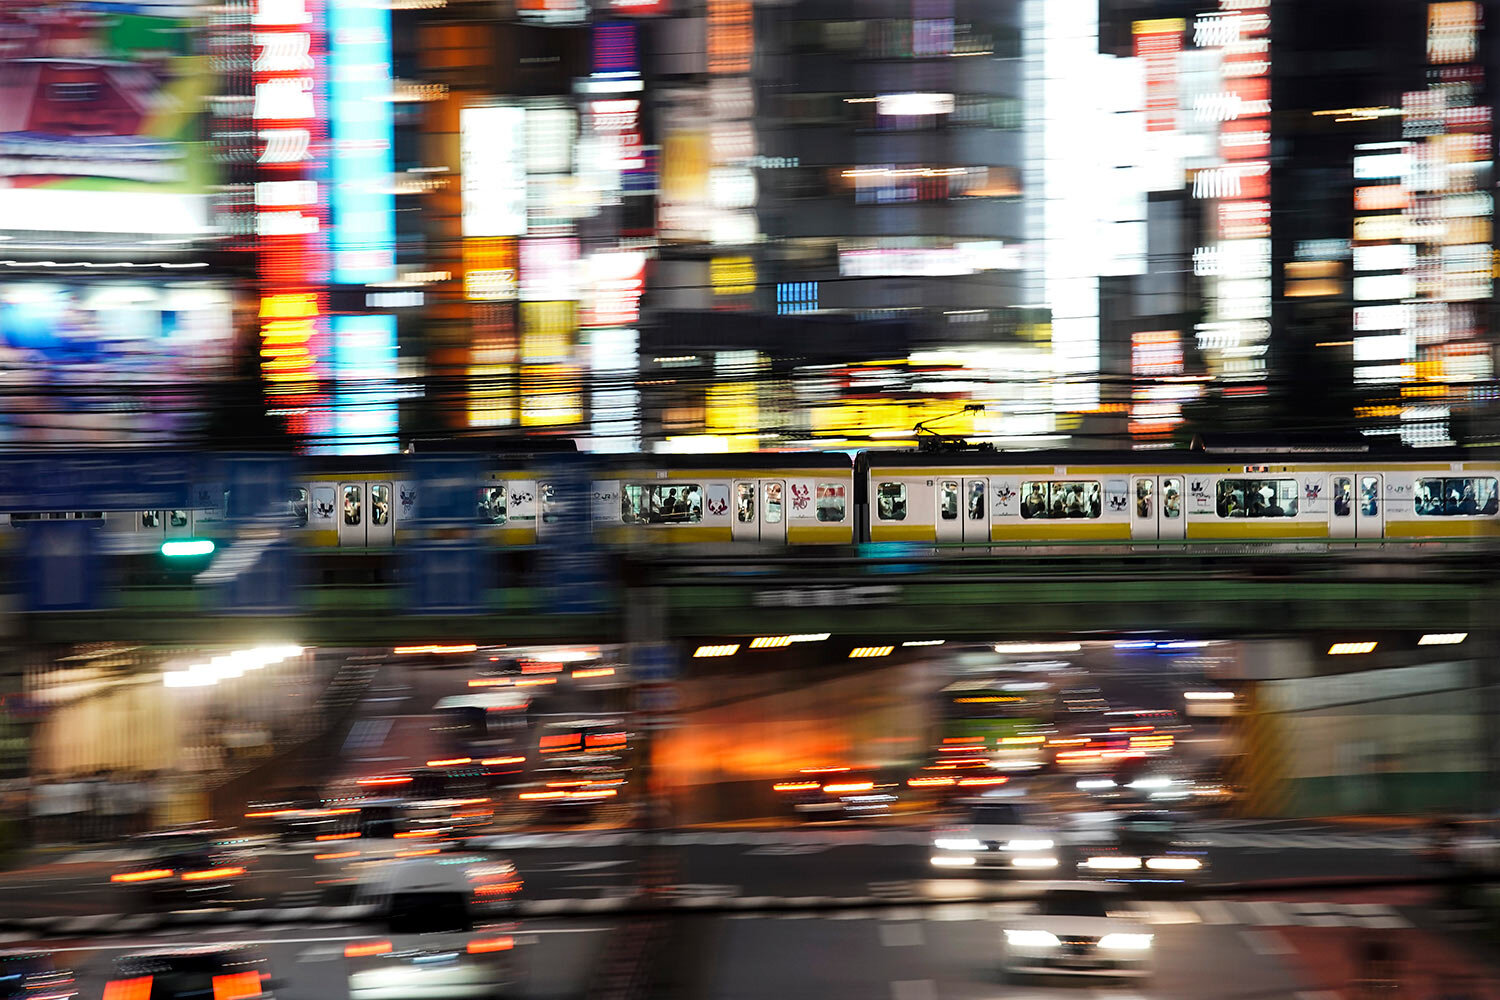  In this July 30, 2019, photo, a train packed with commuters travels through the Shinjuku district of Tokyo during evening rush hours. Tokyo has one of the most advanced public transport systems in the world, but with less than one year to go before 